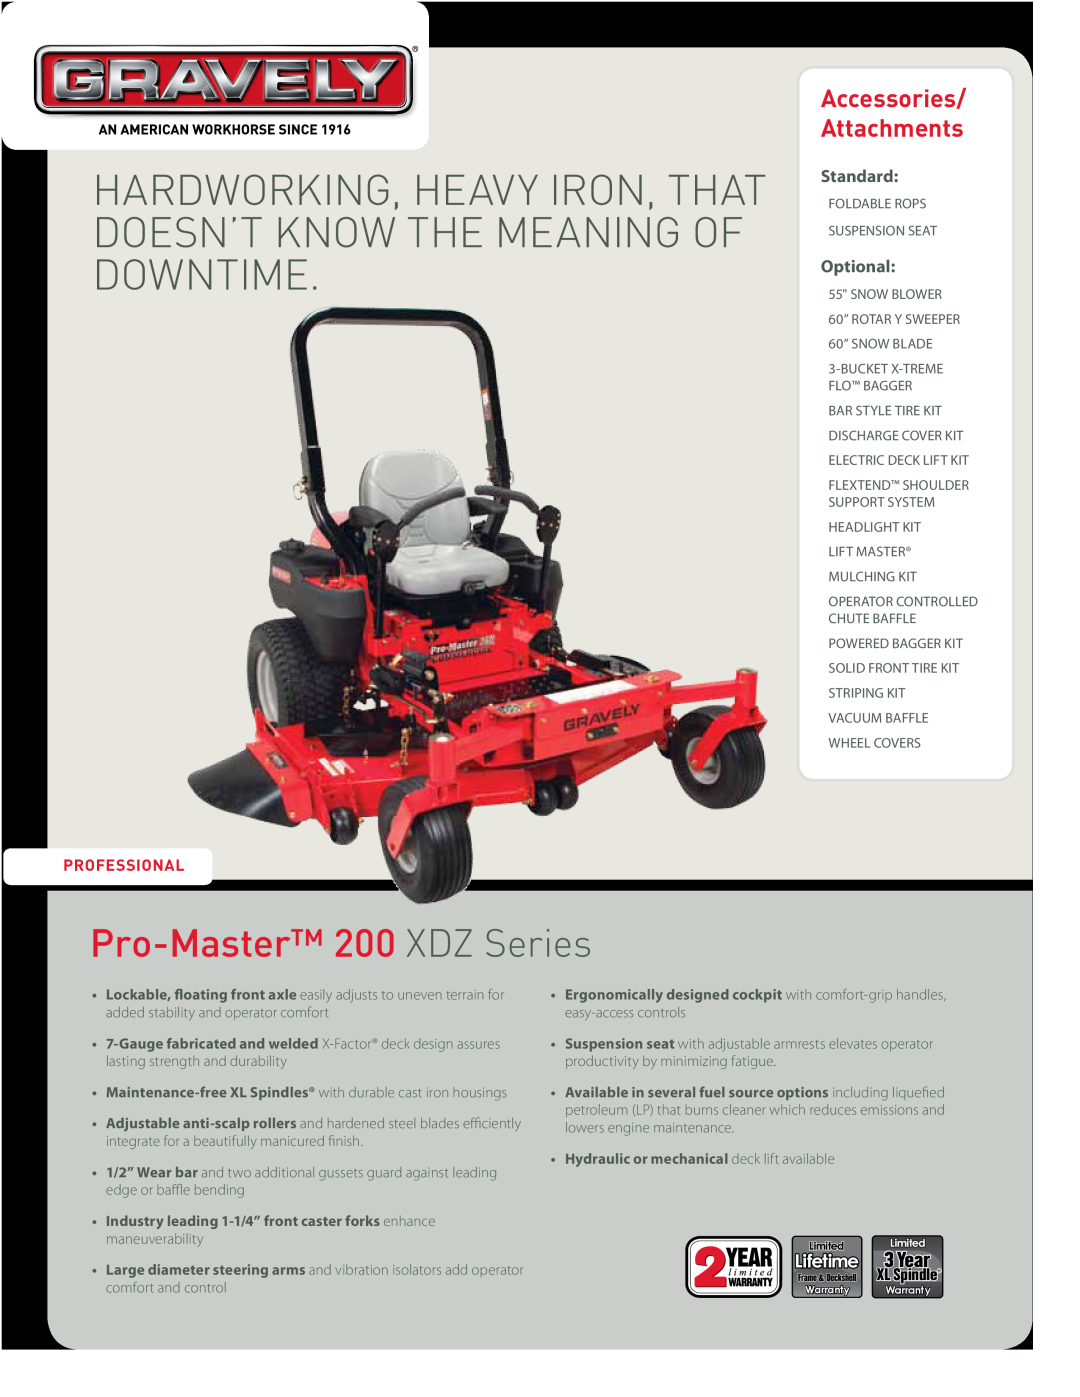 Gravely 992190, 992195 warranty Pro-Master200 XDZ Series, Accessories/ Attachments, Year, Standard, Optional, Professional 